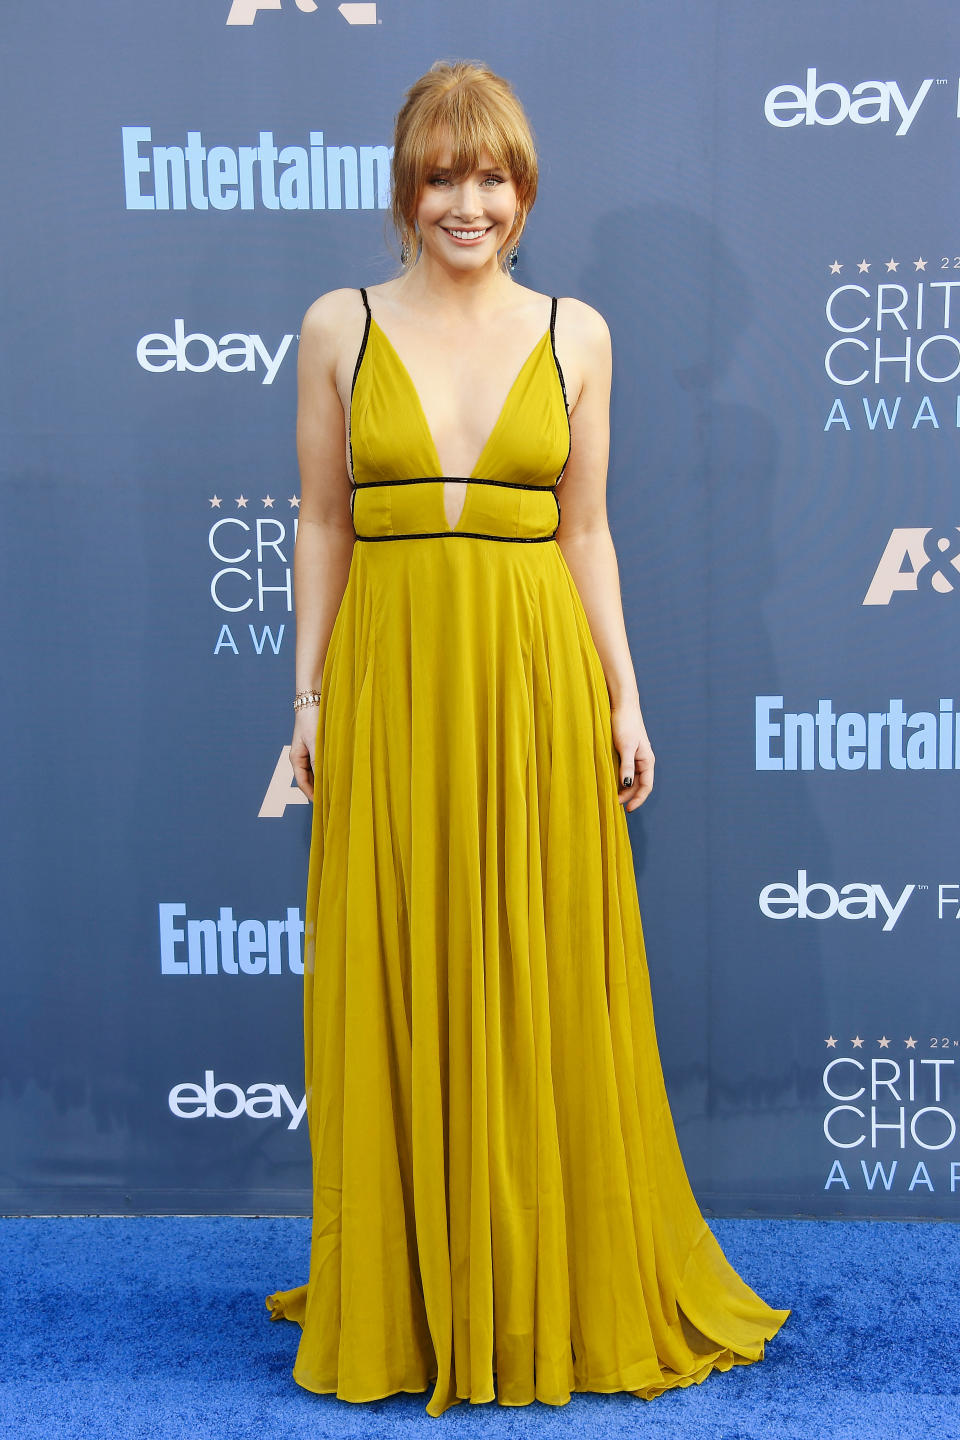 Bryce Dallas Howard had to buy her own dress from the High Street for the 2016 Critics’ Choice Awards. (Photo: Getty)